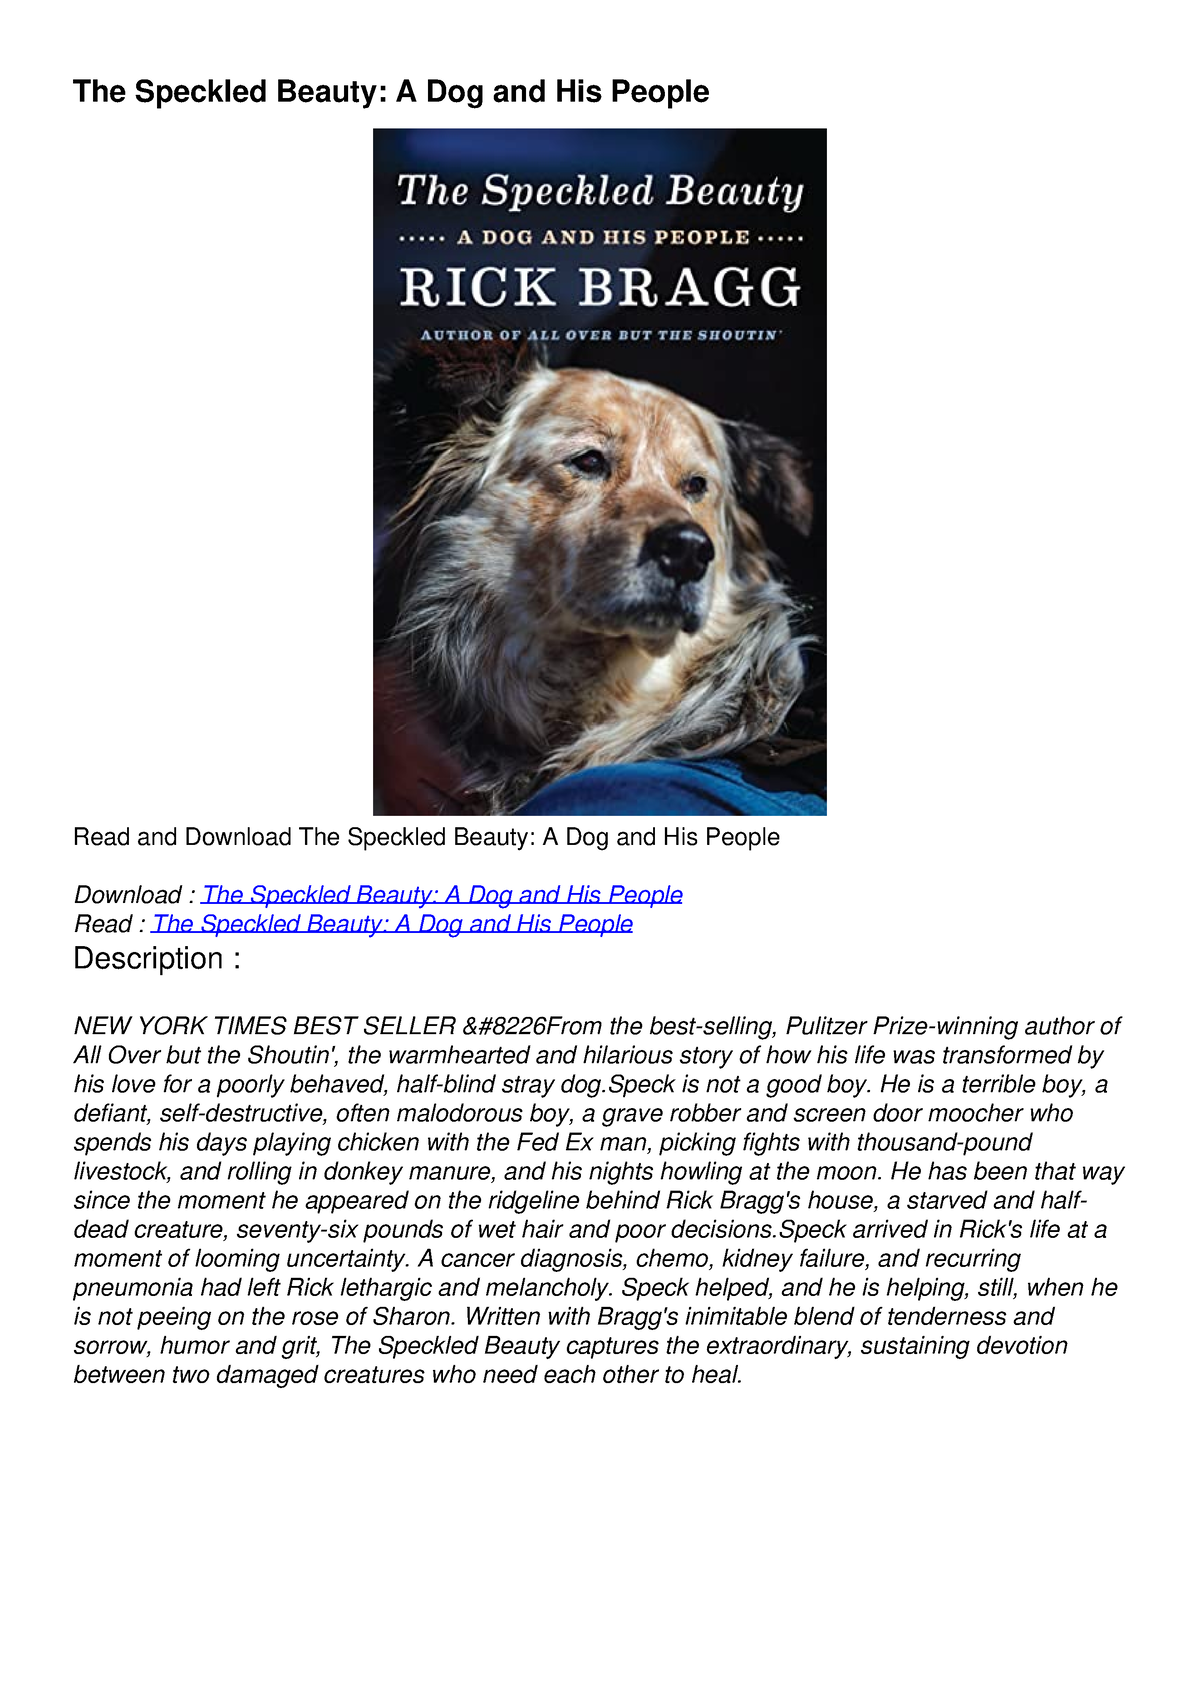 EPUB DOWNLOAD The Speckled Beauty: A Dog and His People ebooks - The